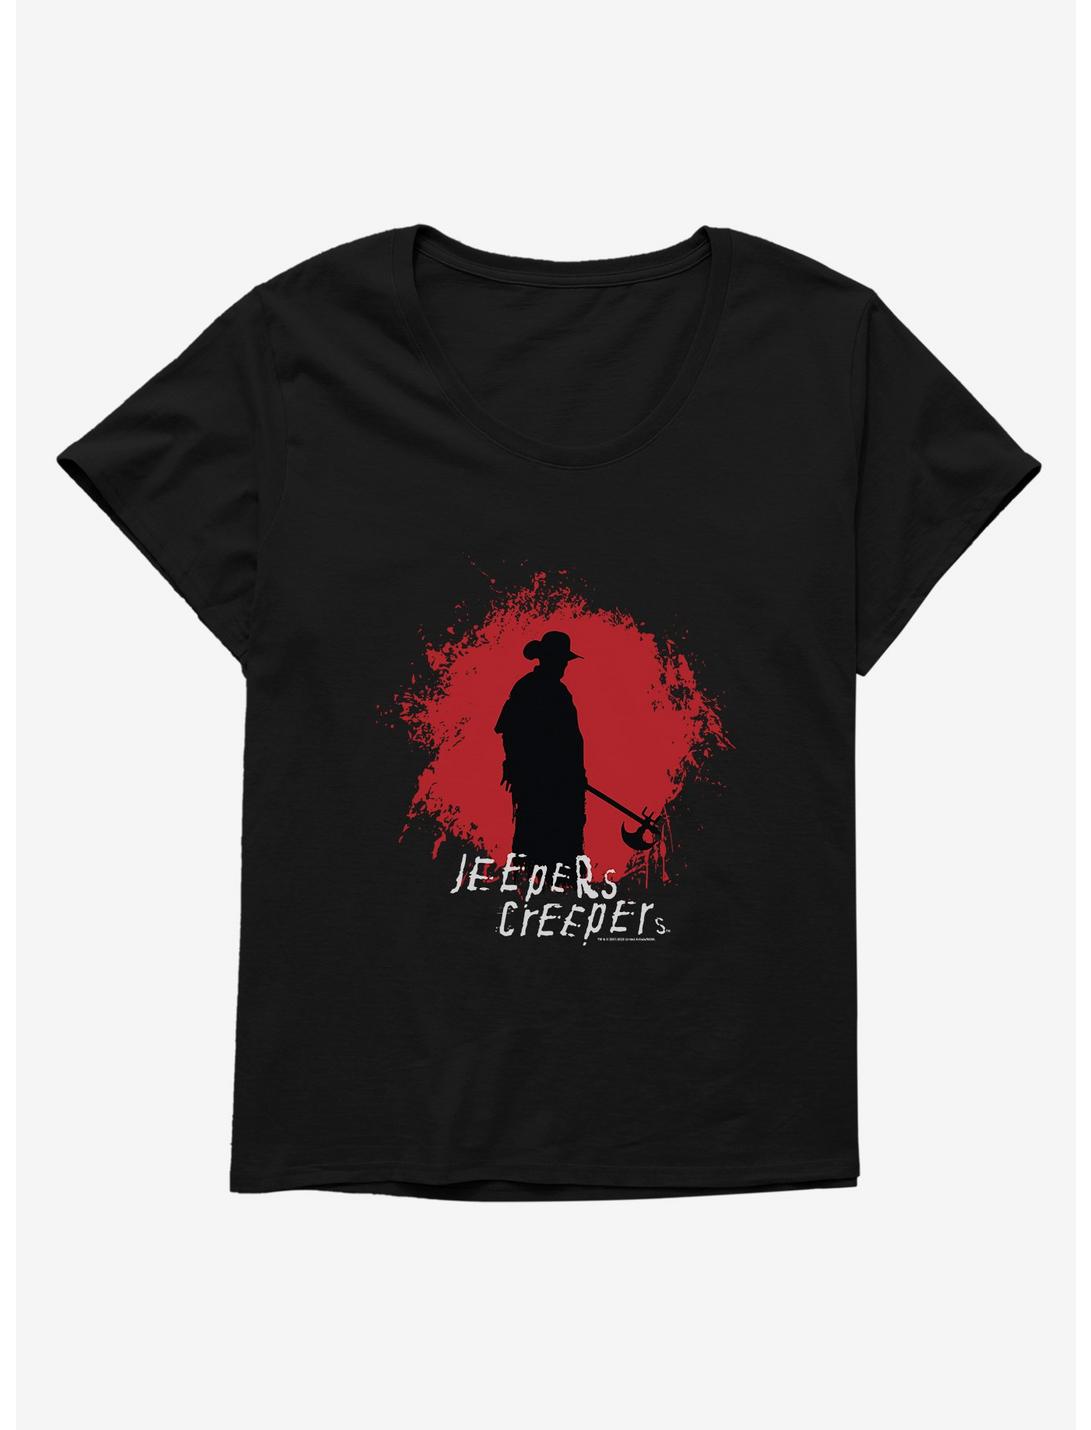 Jeepers Creepers The Creeper Womens T-Shirt Plus Size, BLACK, hi-res